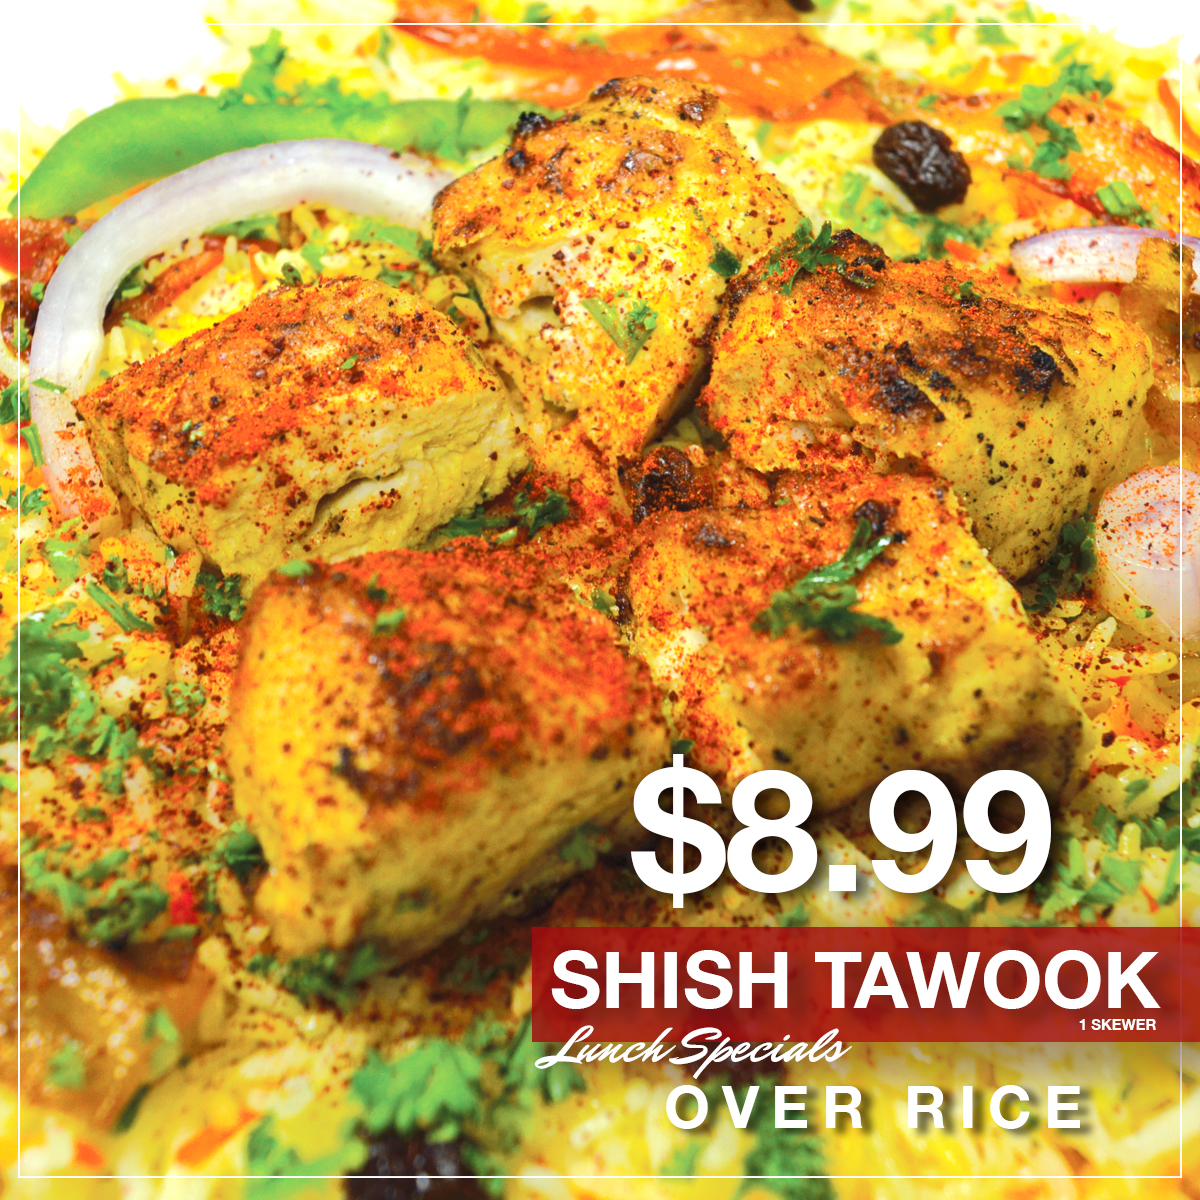 shish tawook Lunch specials-22